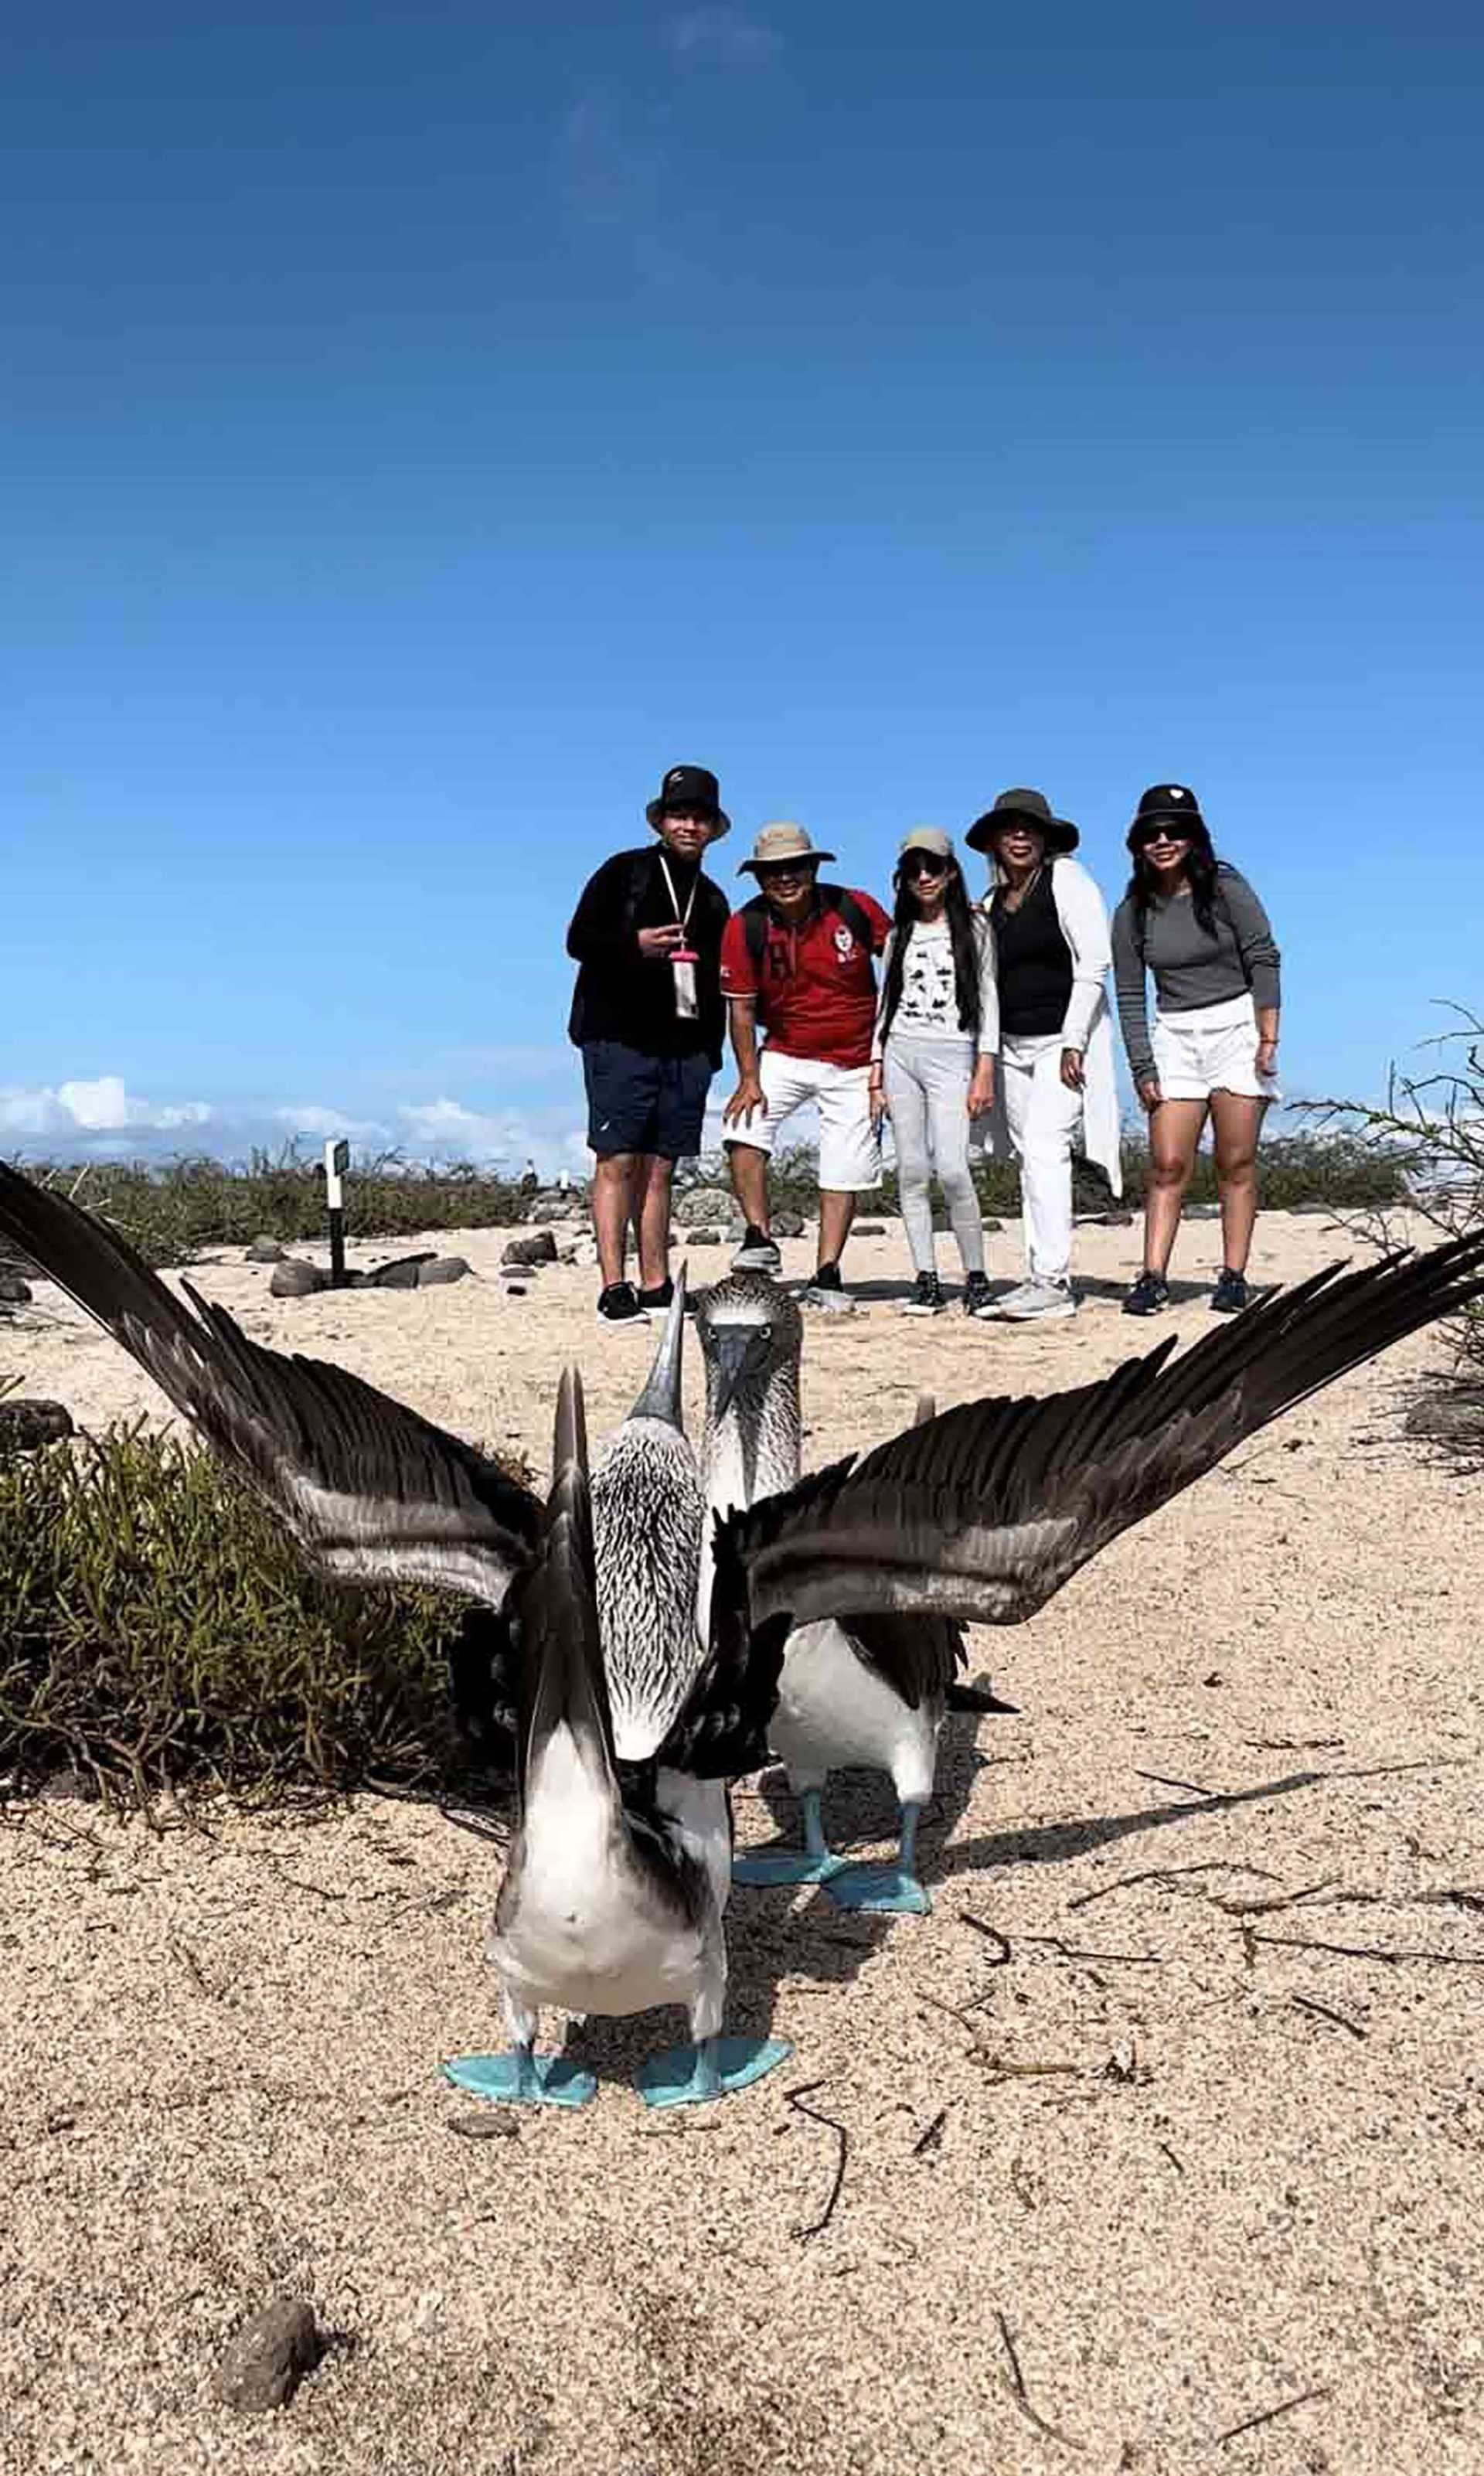 blue footed boobies performing in front of guests